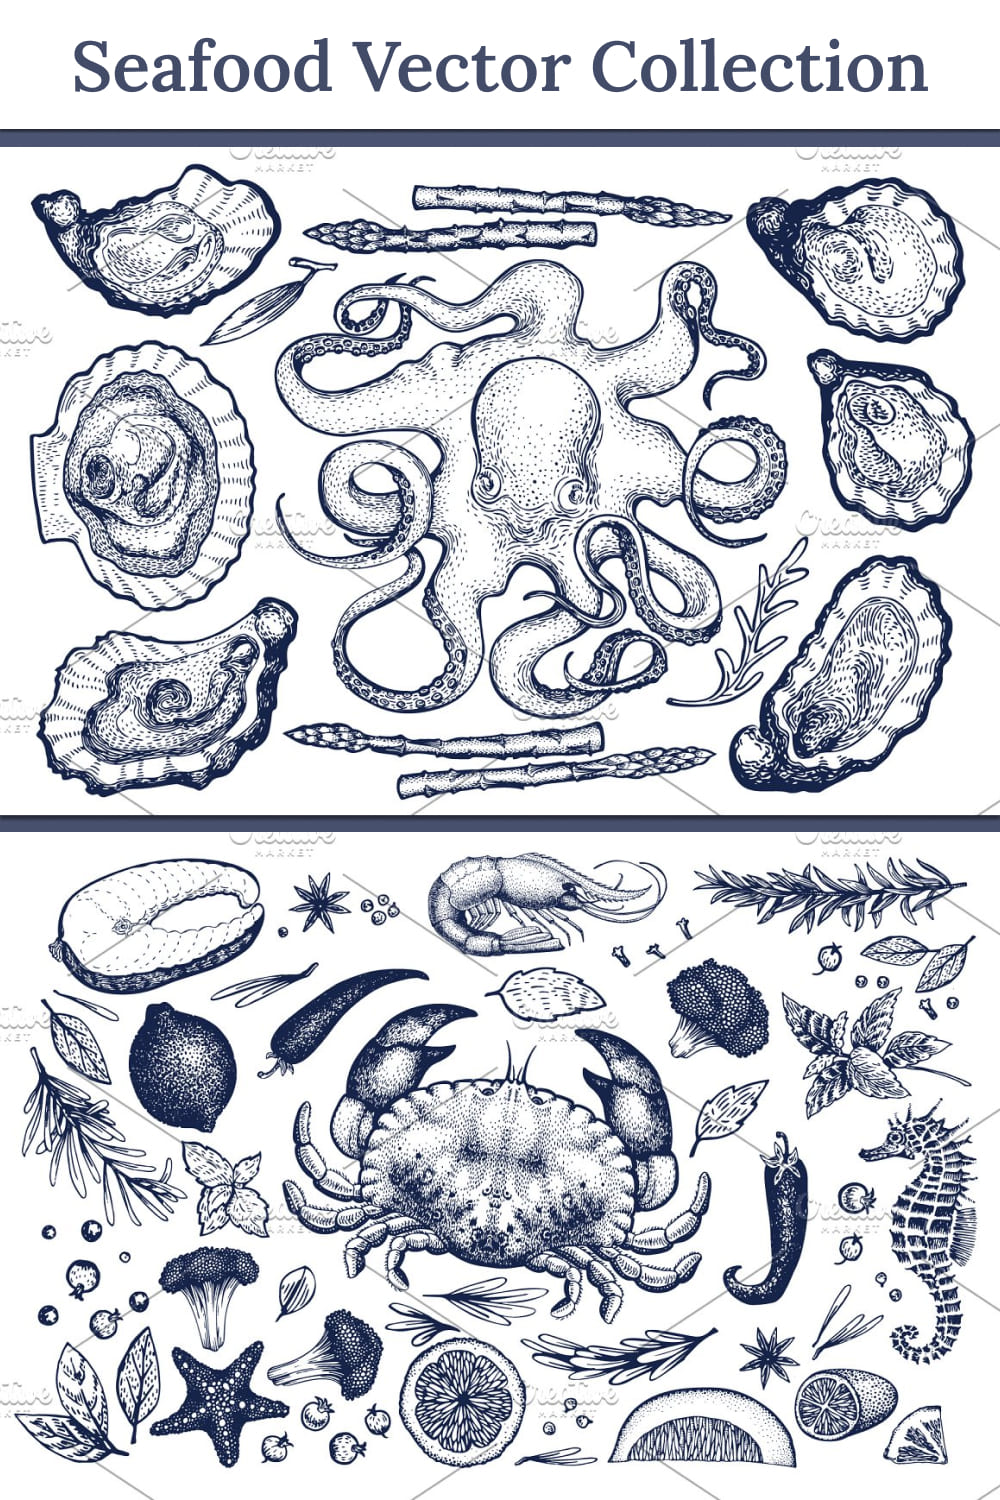 Seafood vector collection - pinterest image preview.